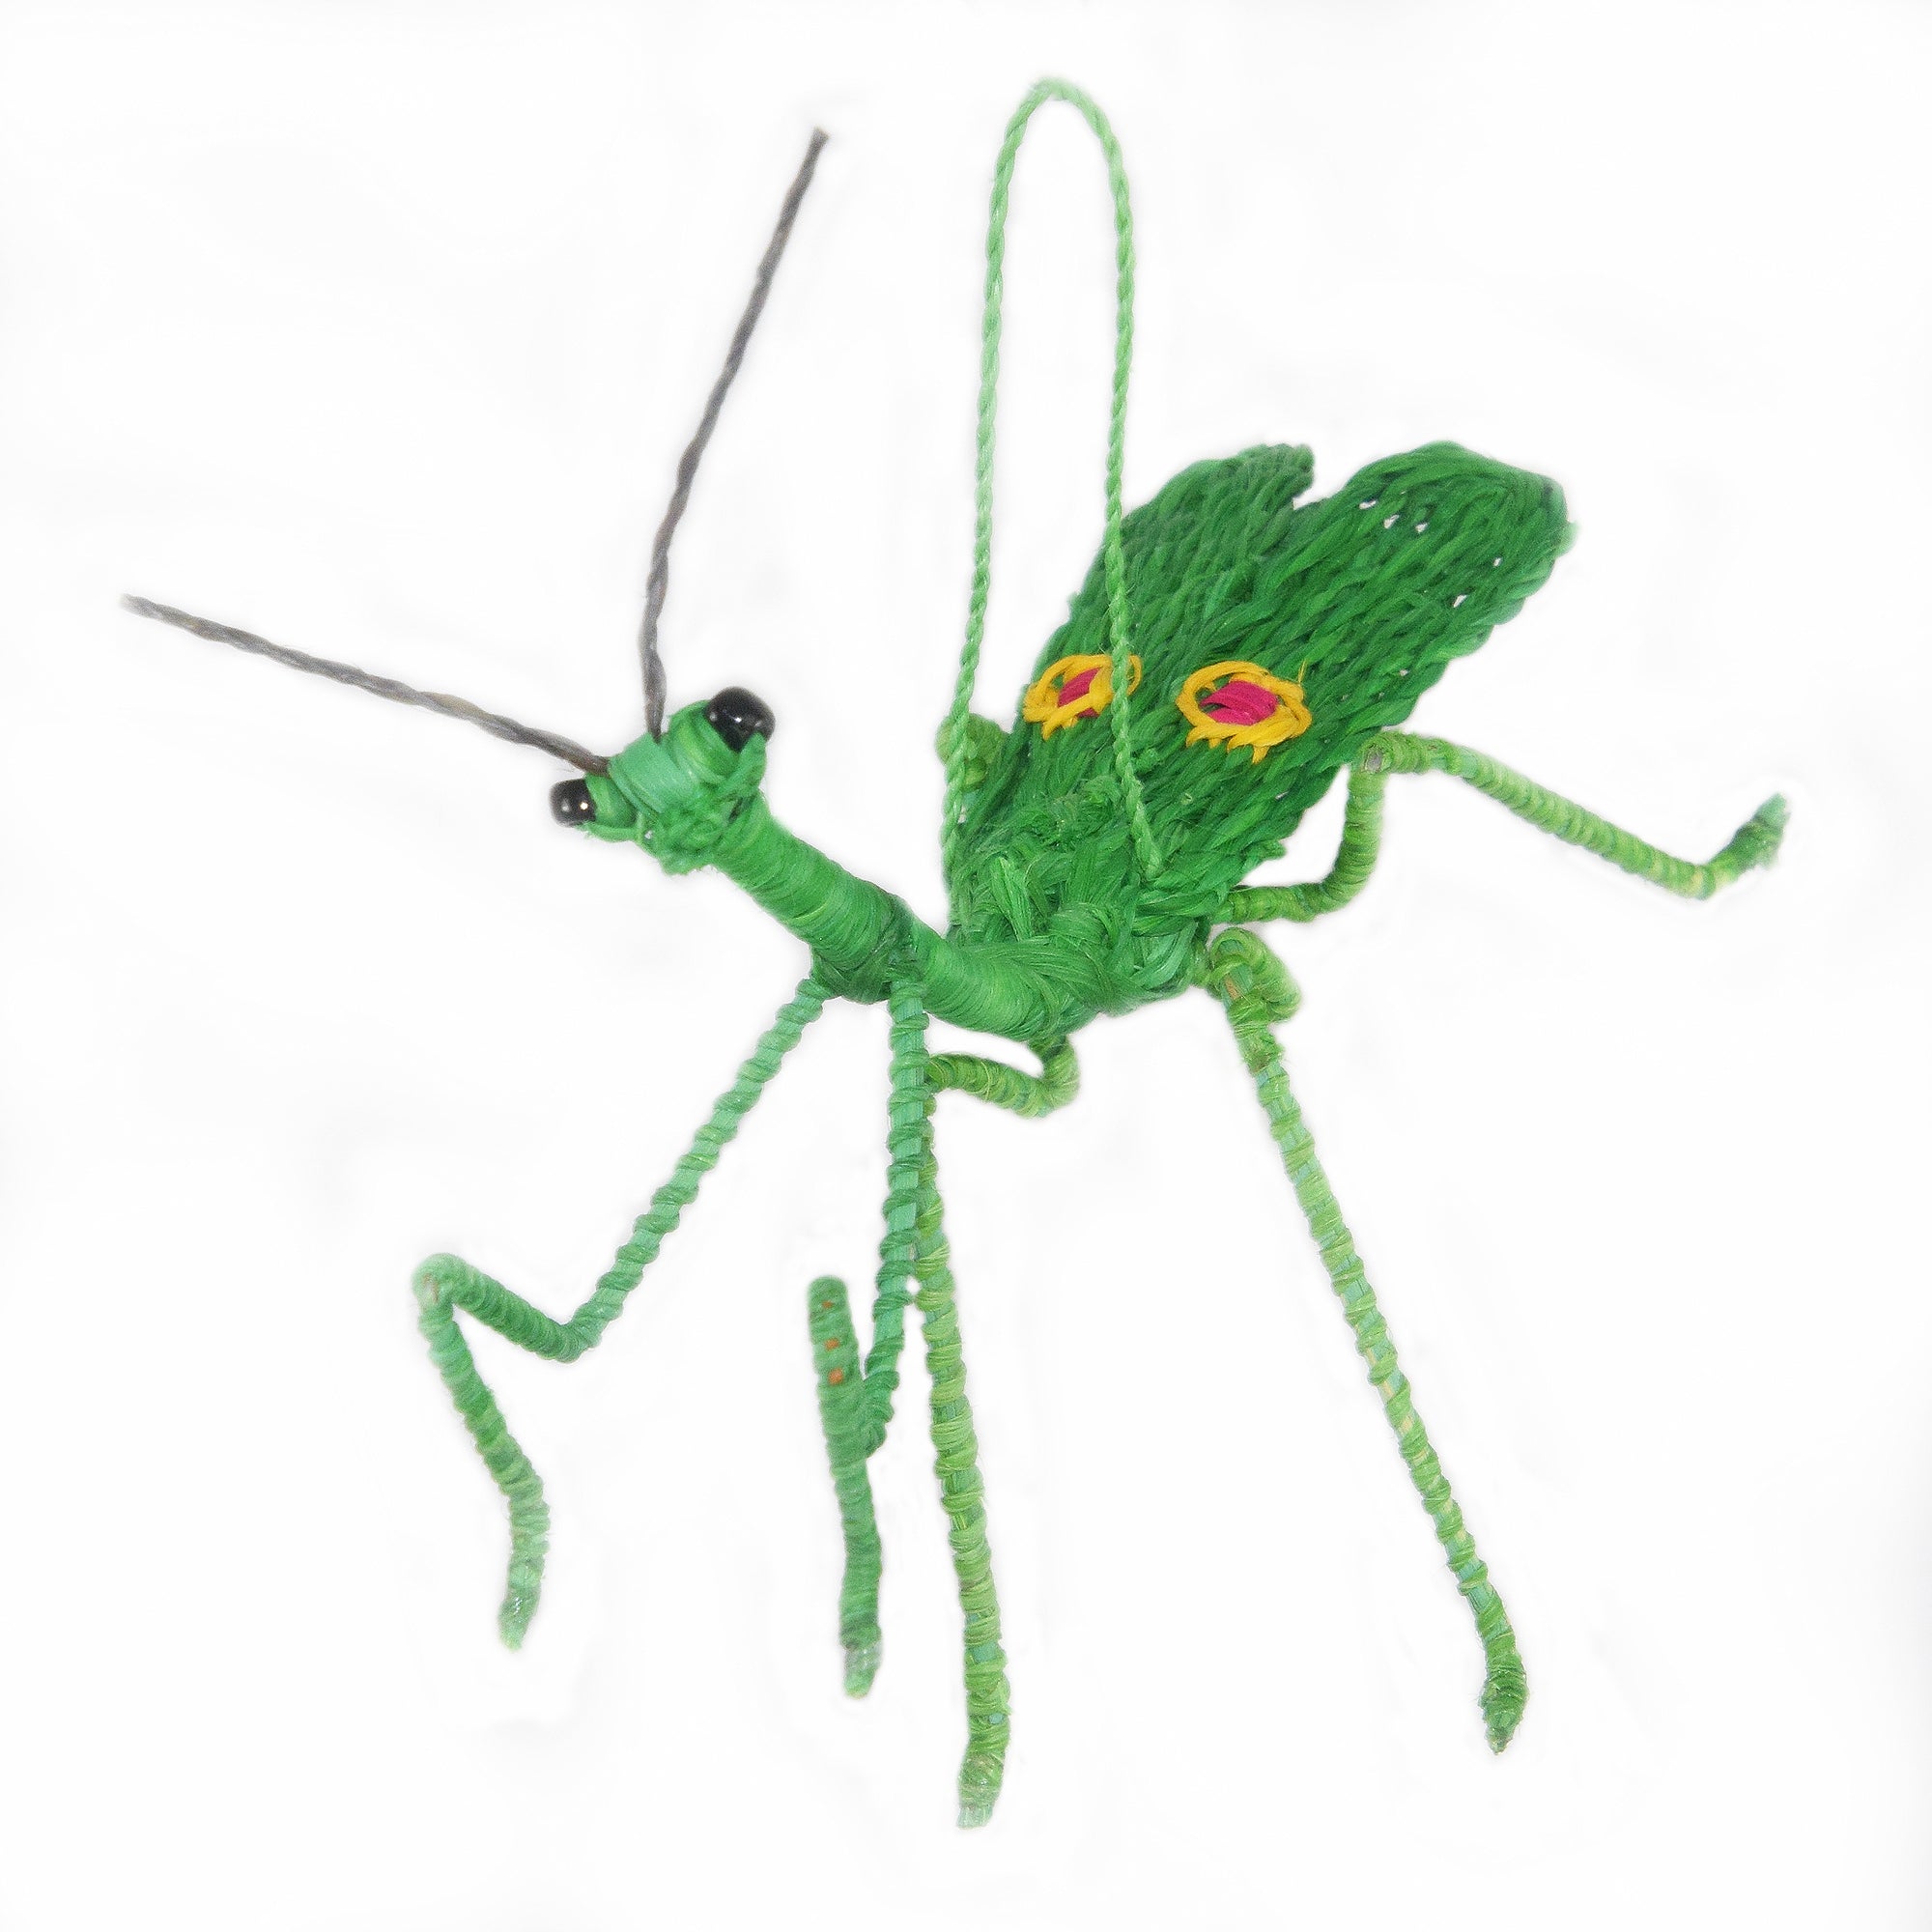 PRAYING MANTIS WOVEN INSECT ORNAMENT - HAND-MADE BY ARTISAN FROM THE PERUVIAN AMAZON